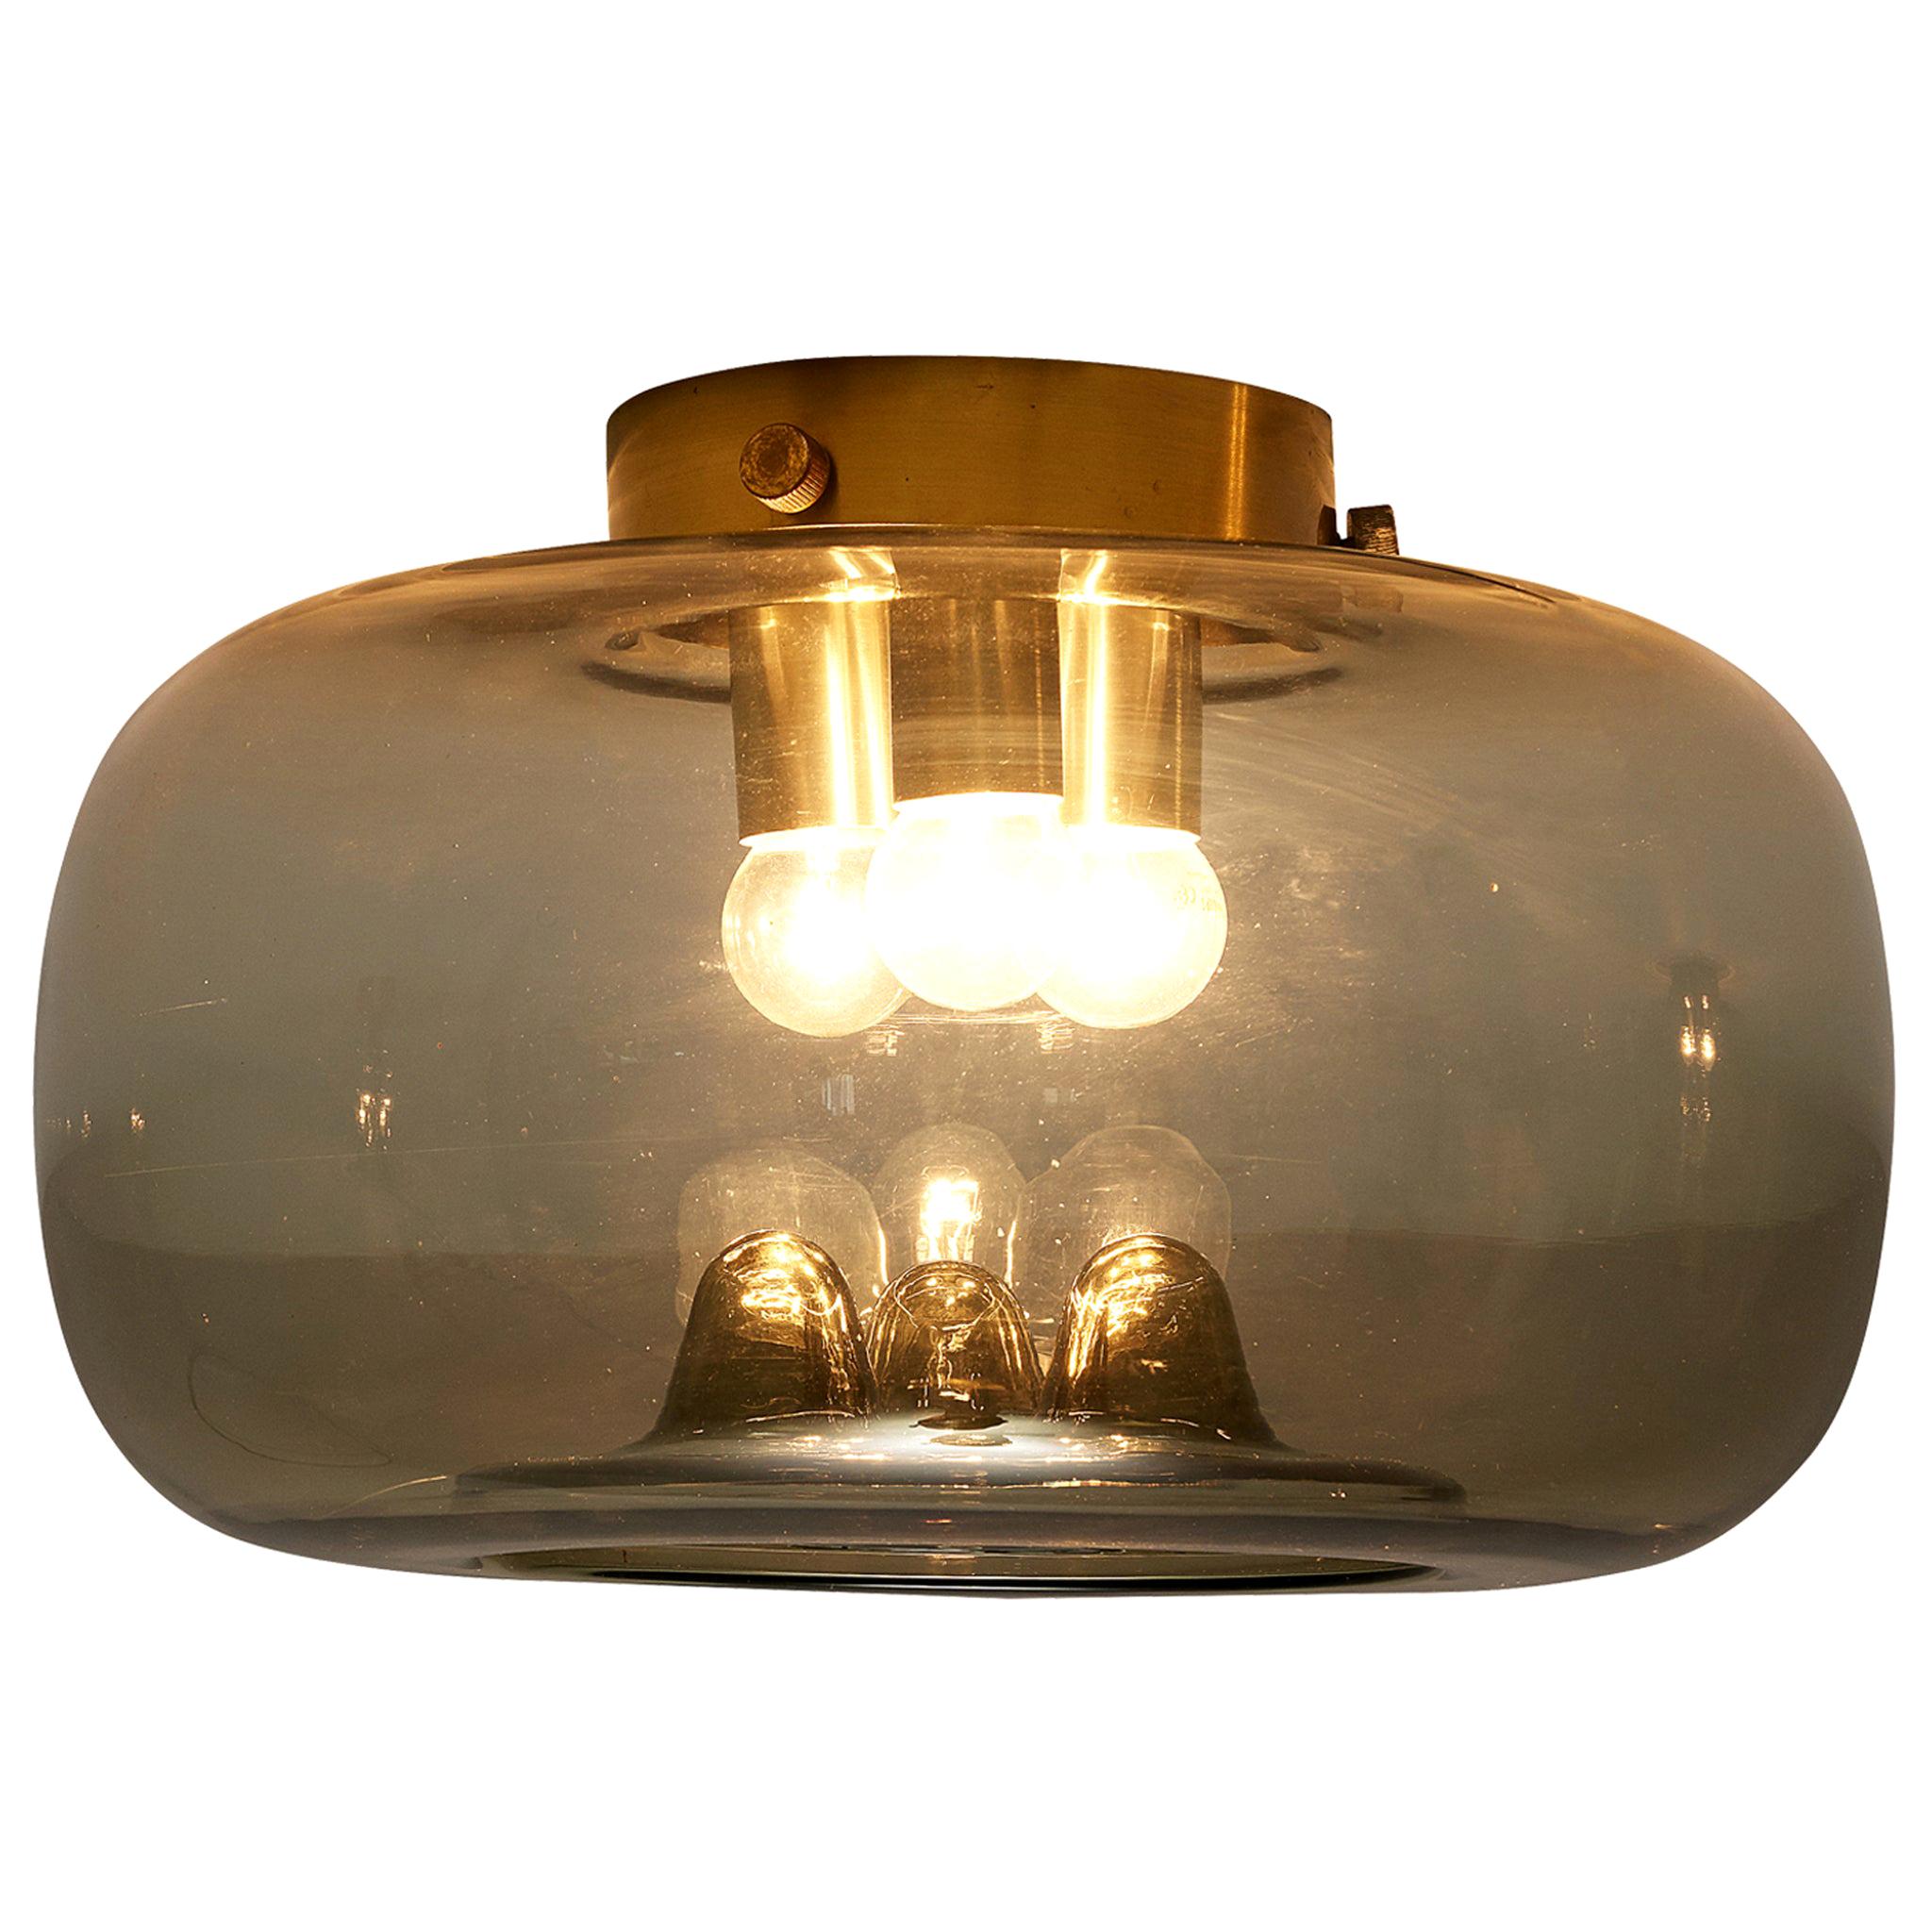 RAAK Amsterdam Ceiling Light in Smoked Glass and Brass